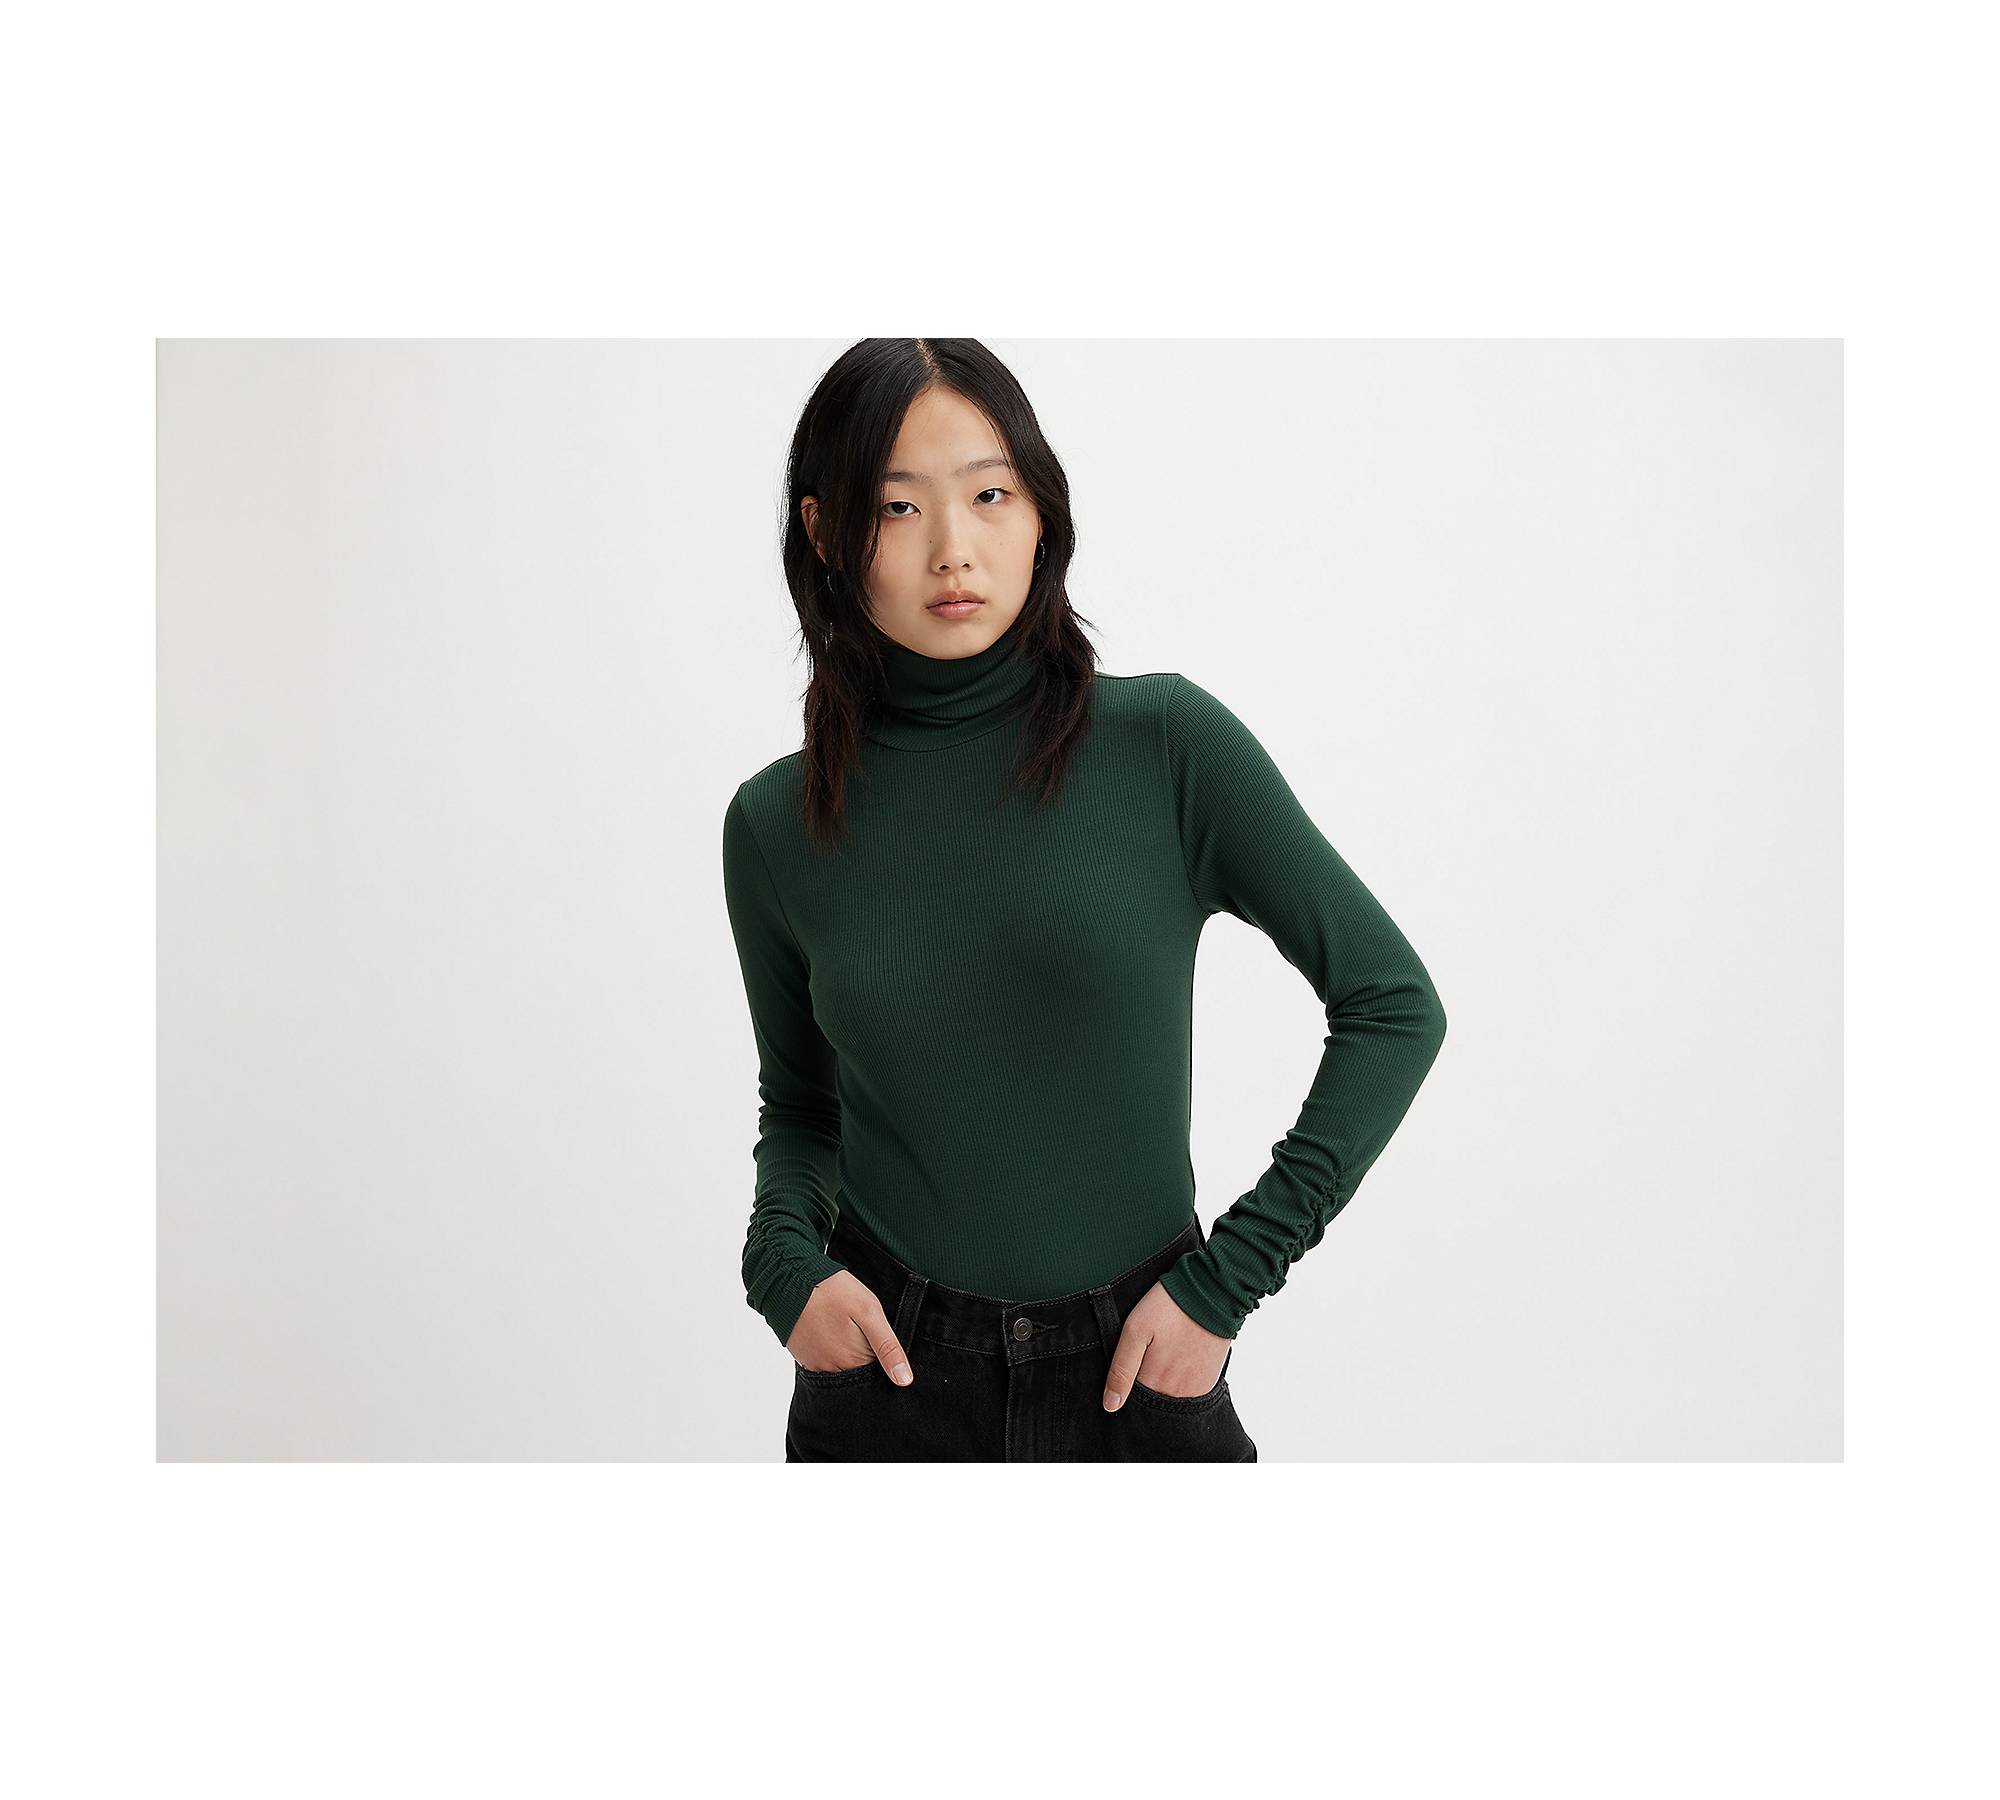 Tall Women's Fitted Long Sleeve Ribbed Turtleneck Tee in Black Xs / Tall / Black